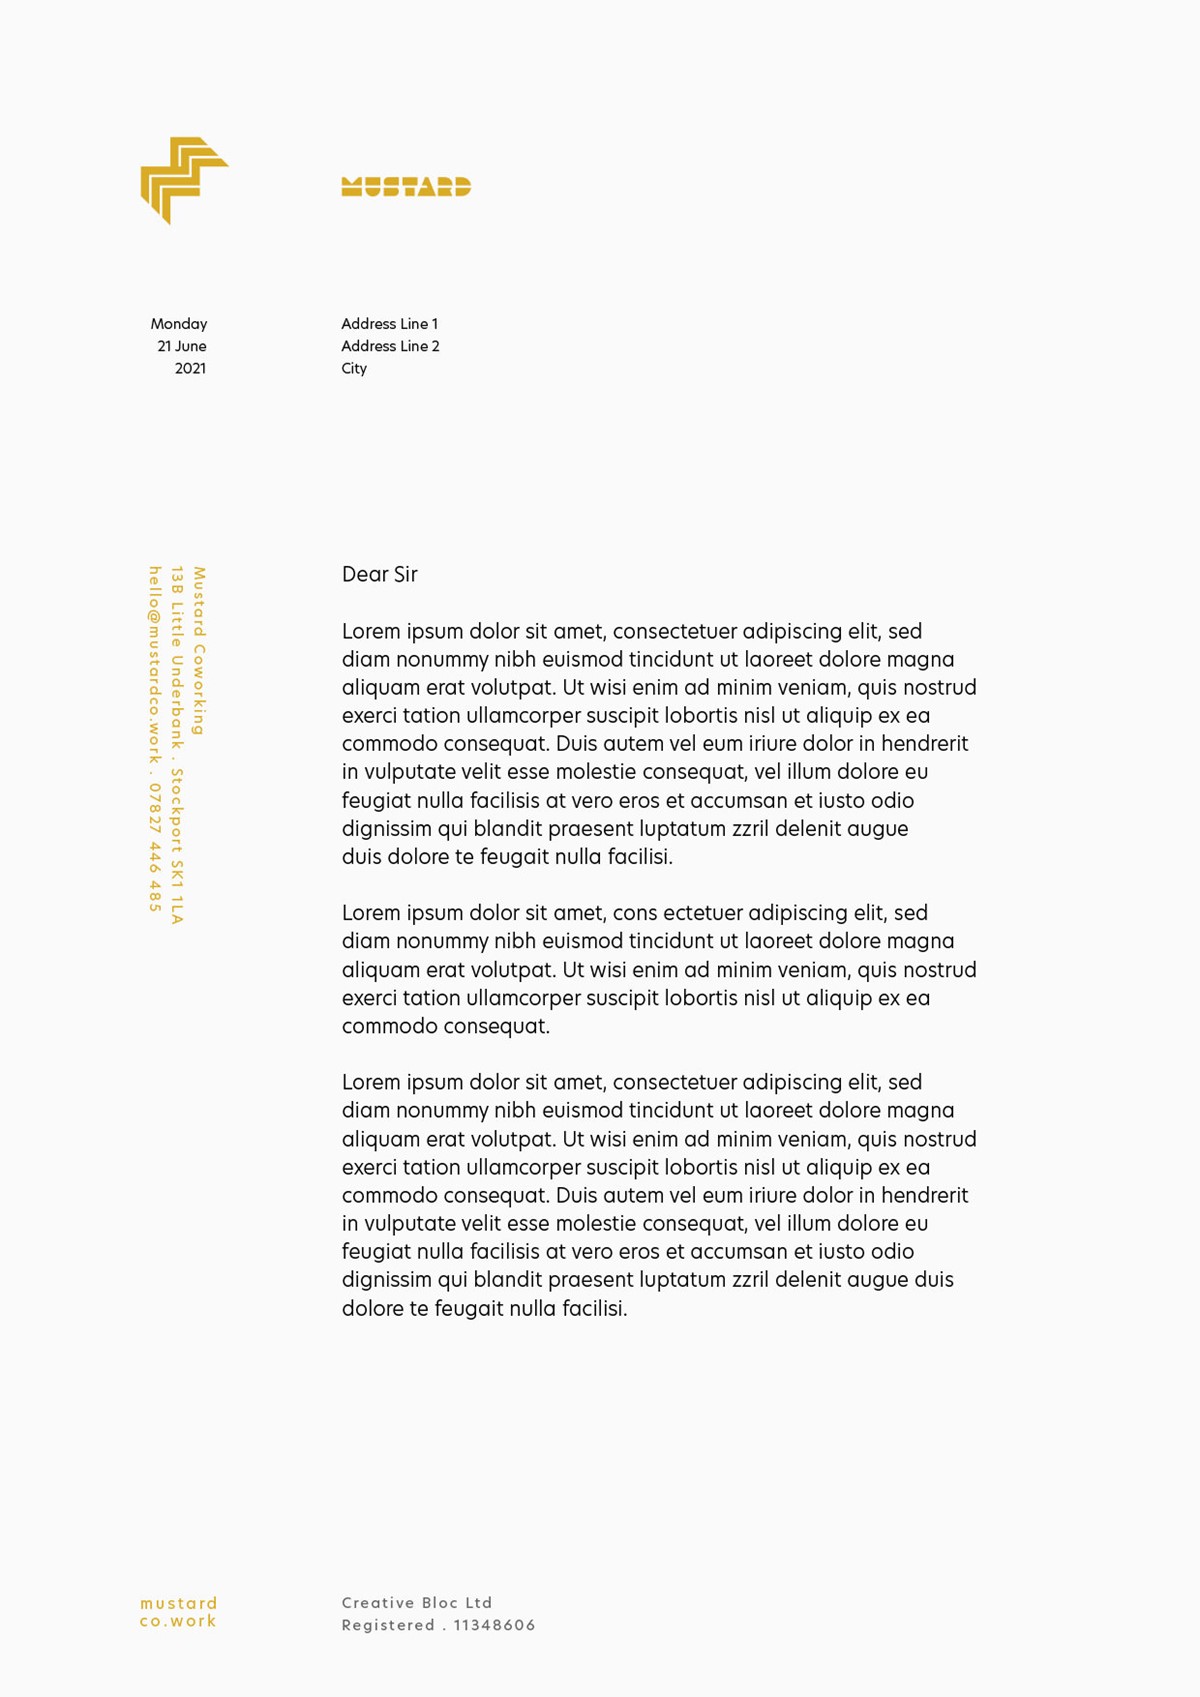 Mustard Coworking. Letterhead mock-up. Brand identity design by Superfried. Manchester.